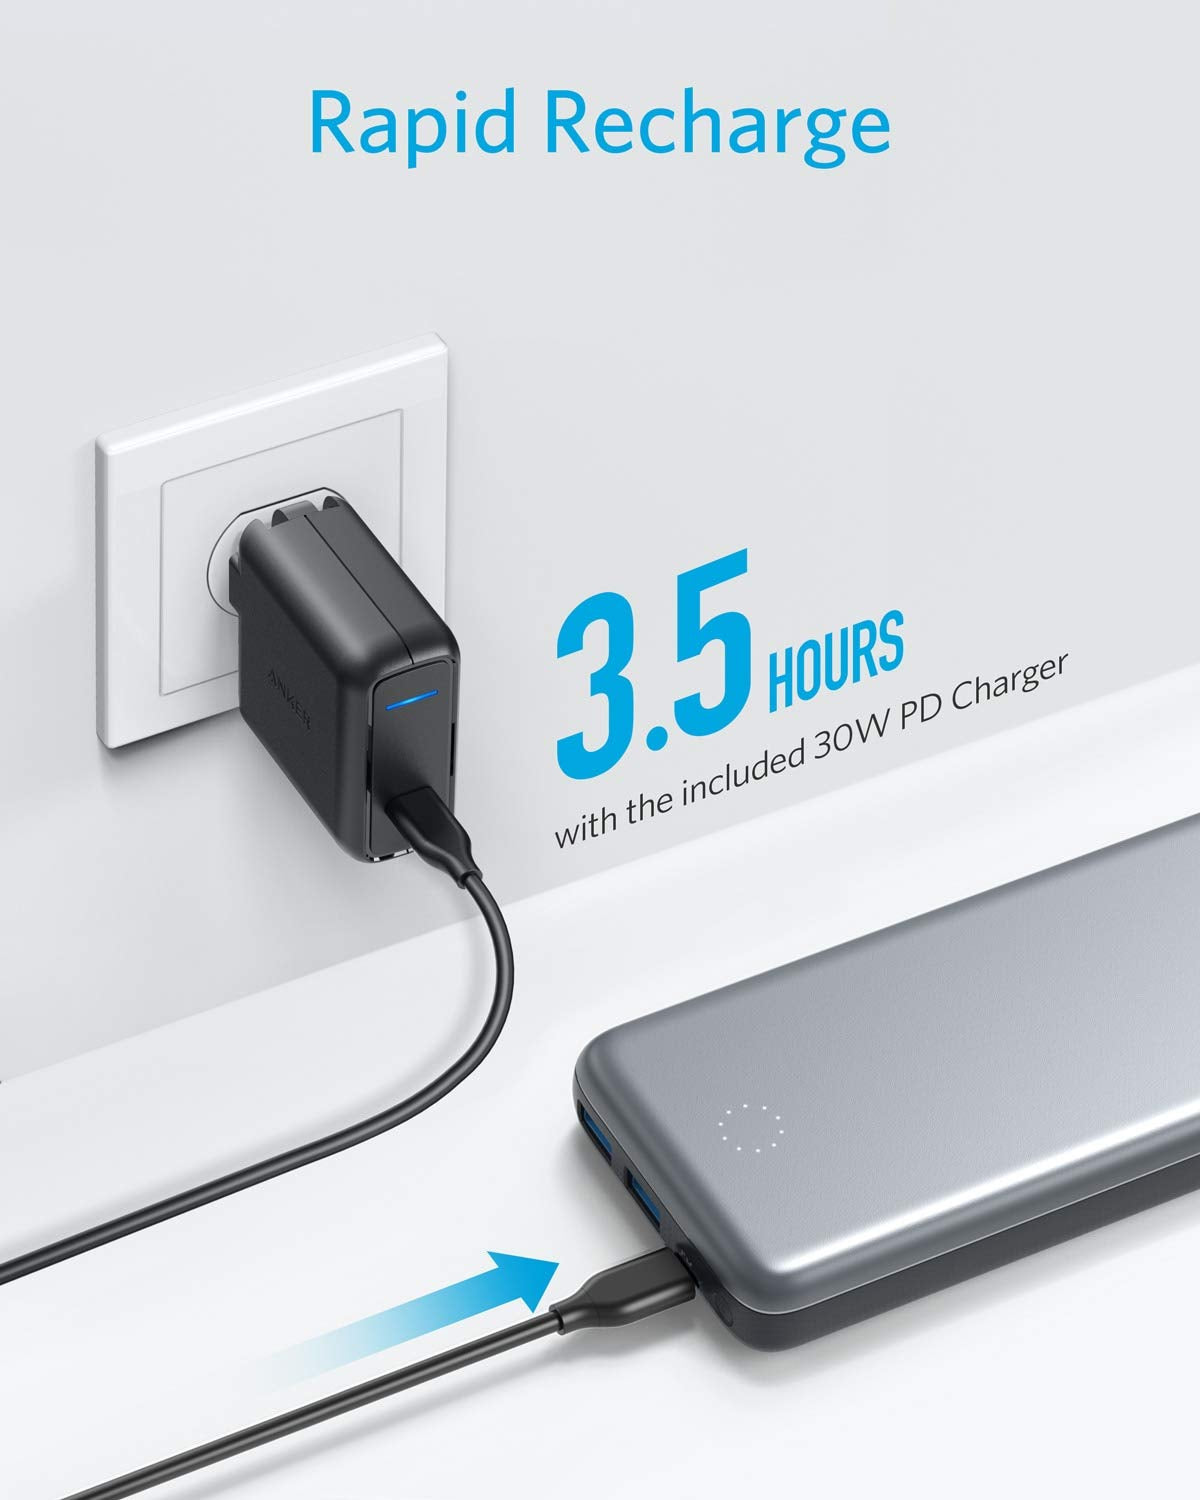 ANKER POWERCORE+ 19000 PD CHARGER AND USB-C HUB POWER BANK